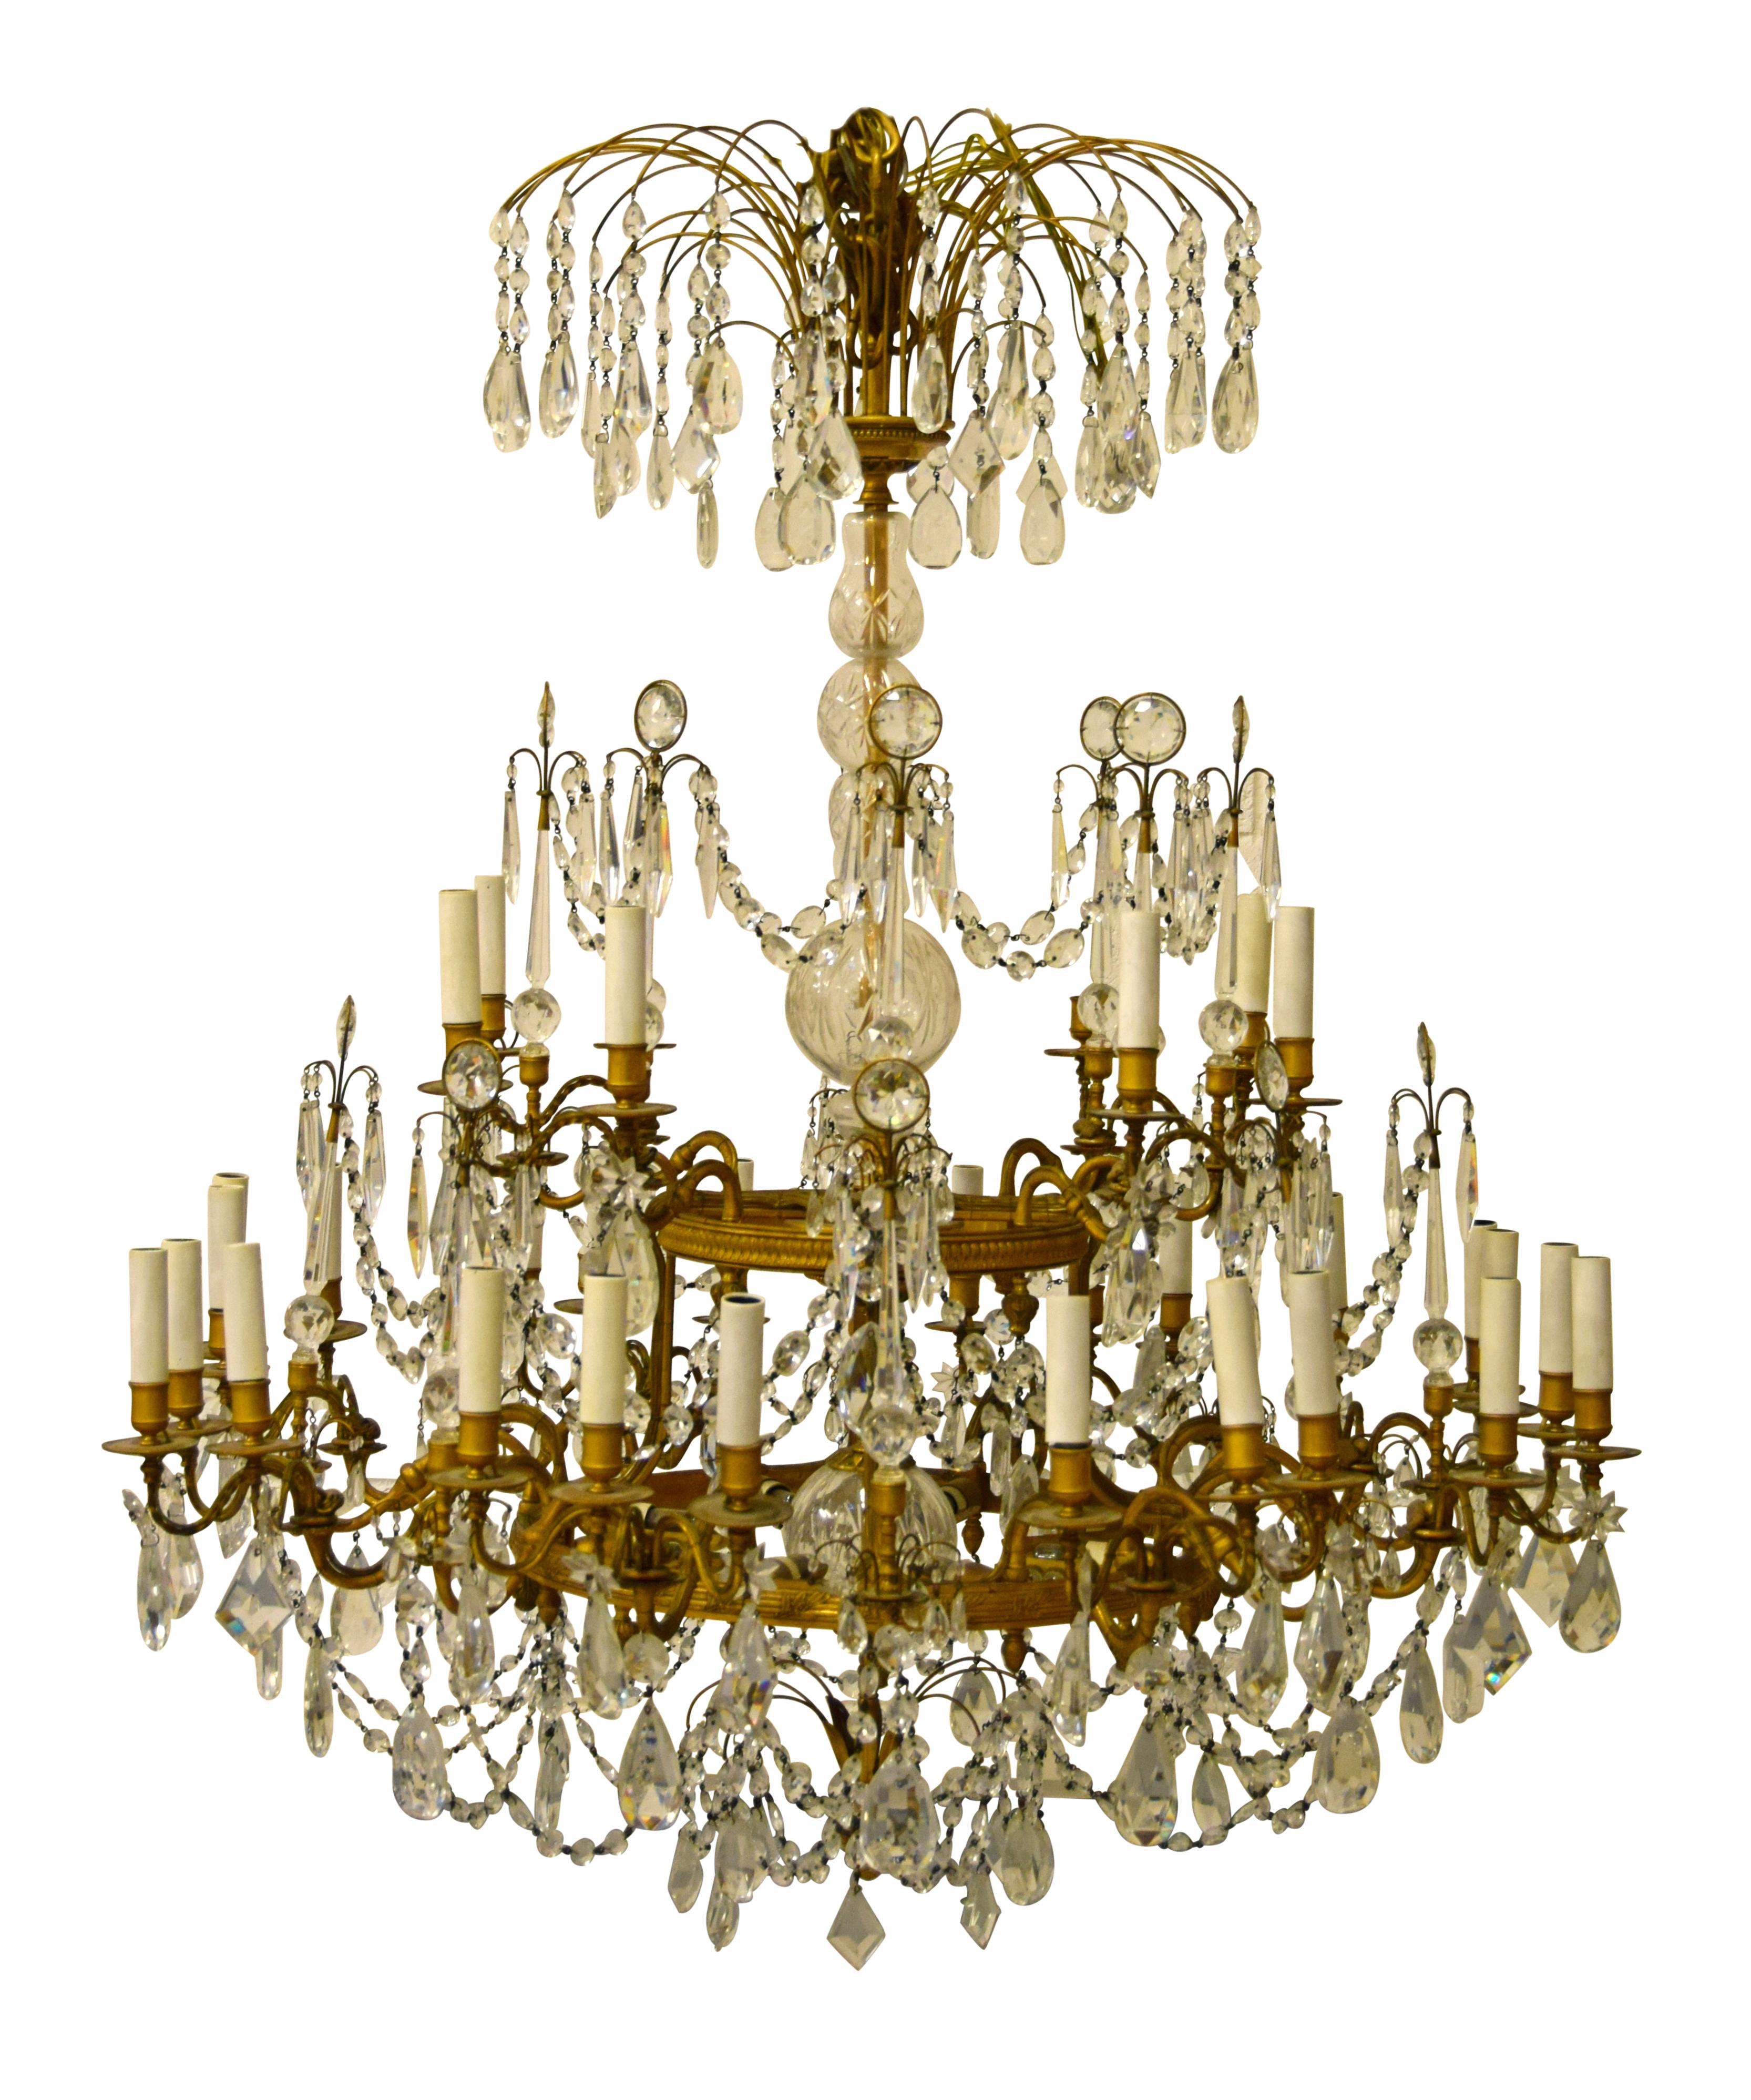 20th century, gilt bronze crystal Louis XVI style chandelier

The important golden bronze chandelier was made in northern Europe in the early 20th century in the Louis XVI style.
The structure is in gilded bronze finely chiselled with geometric